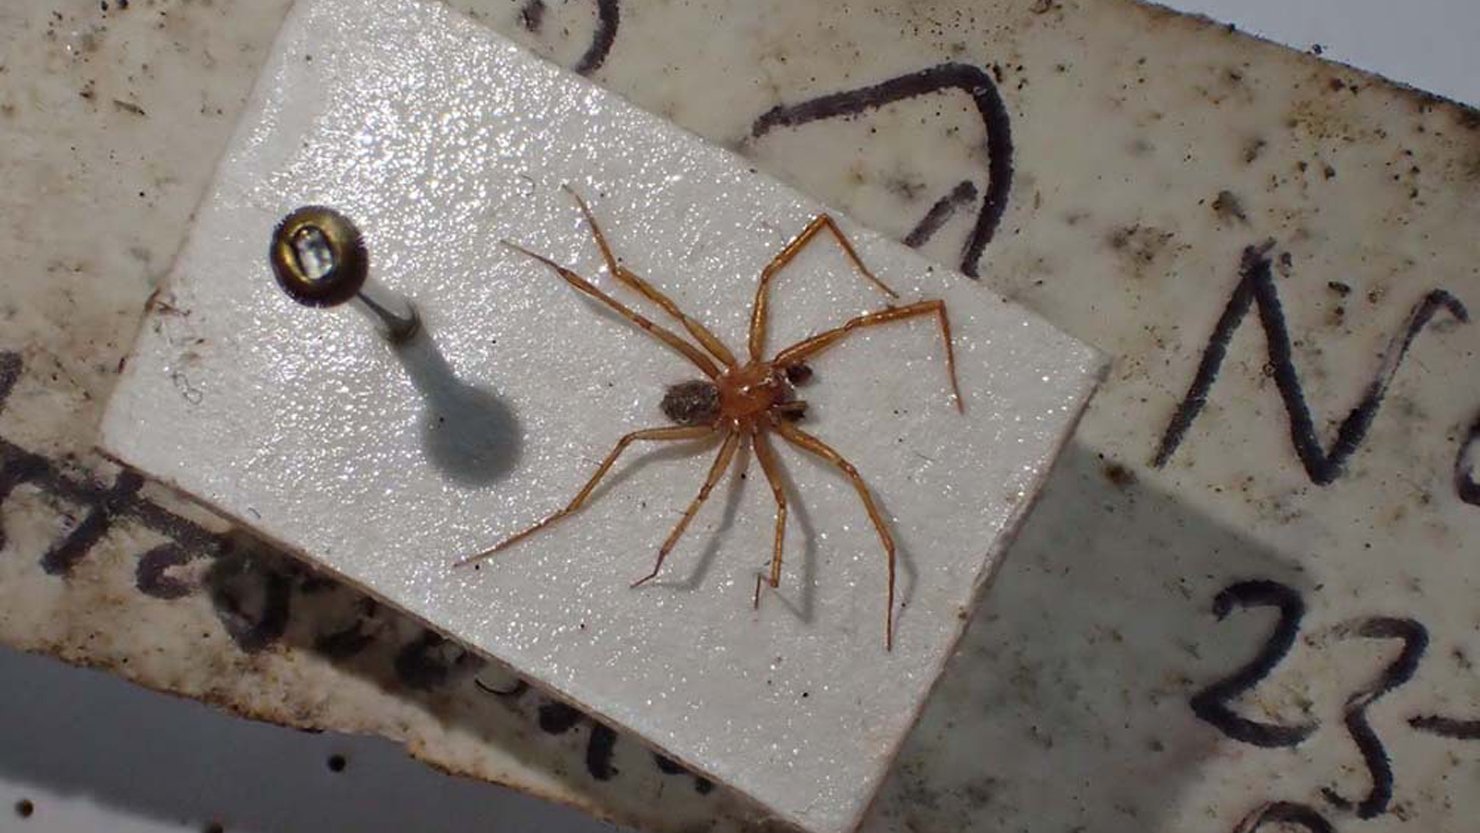 Photo of the rare Horrid Ground Weaver spider from The Box, Plymouth's collections